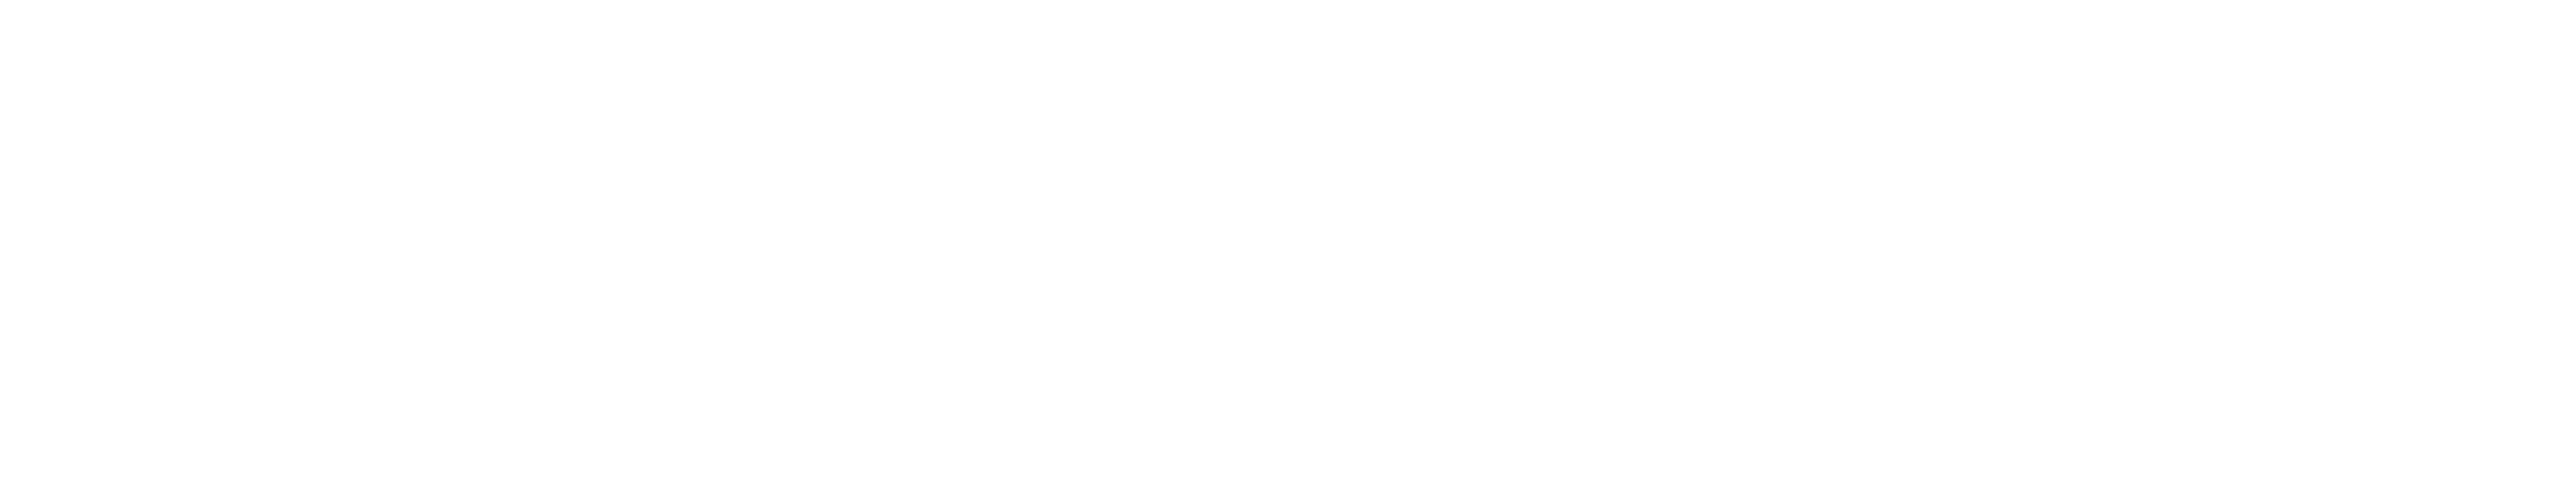 asia pacific security group